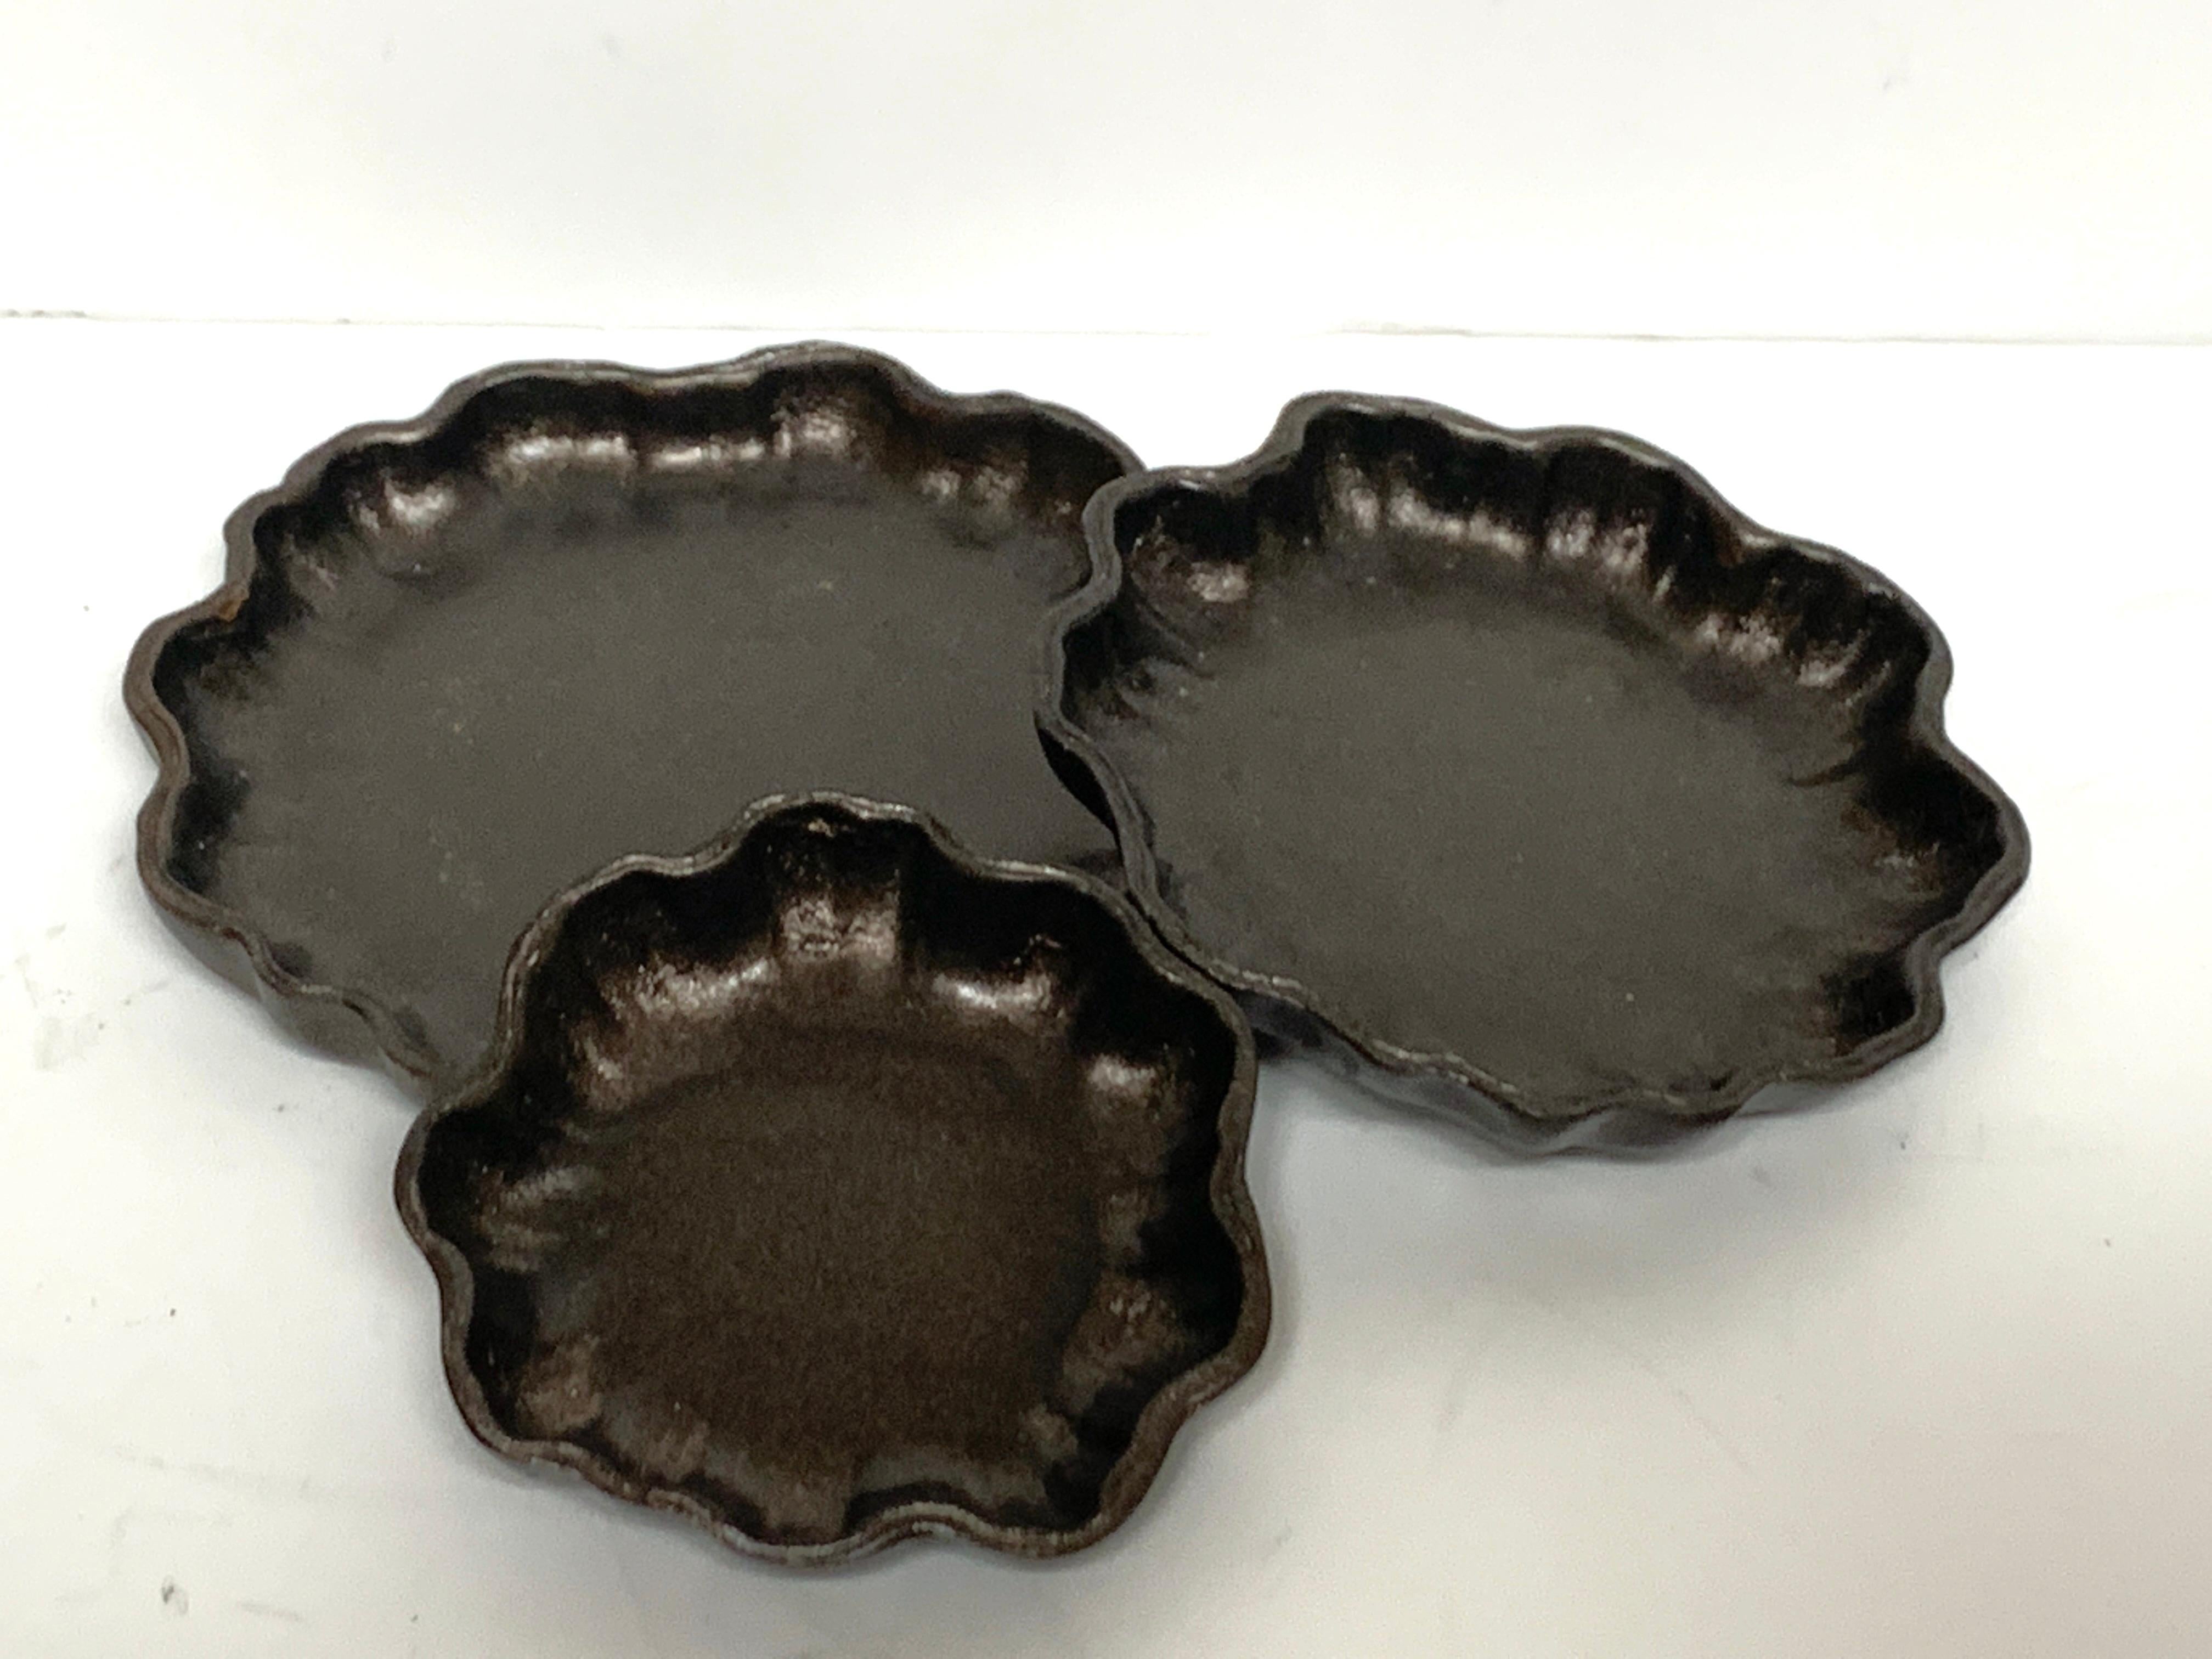 Three Tiffany Studios bronze graduating lily pad dishes
All pieces marked with Tiffany Studios New York, and 